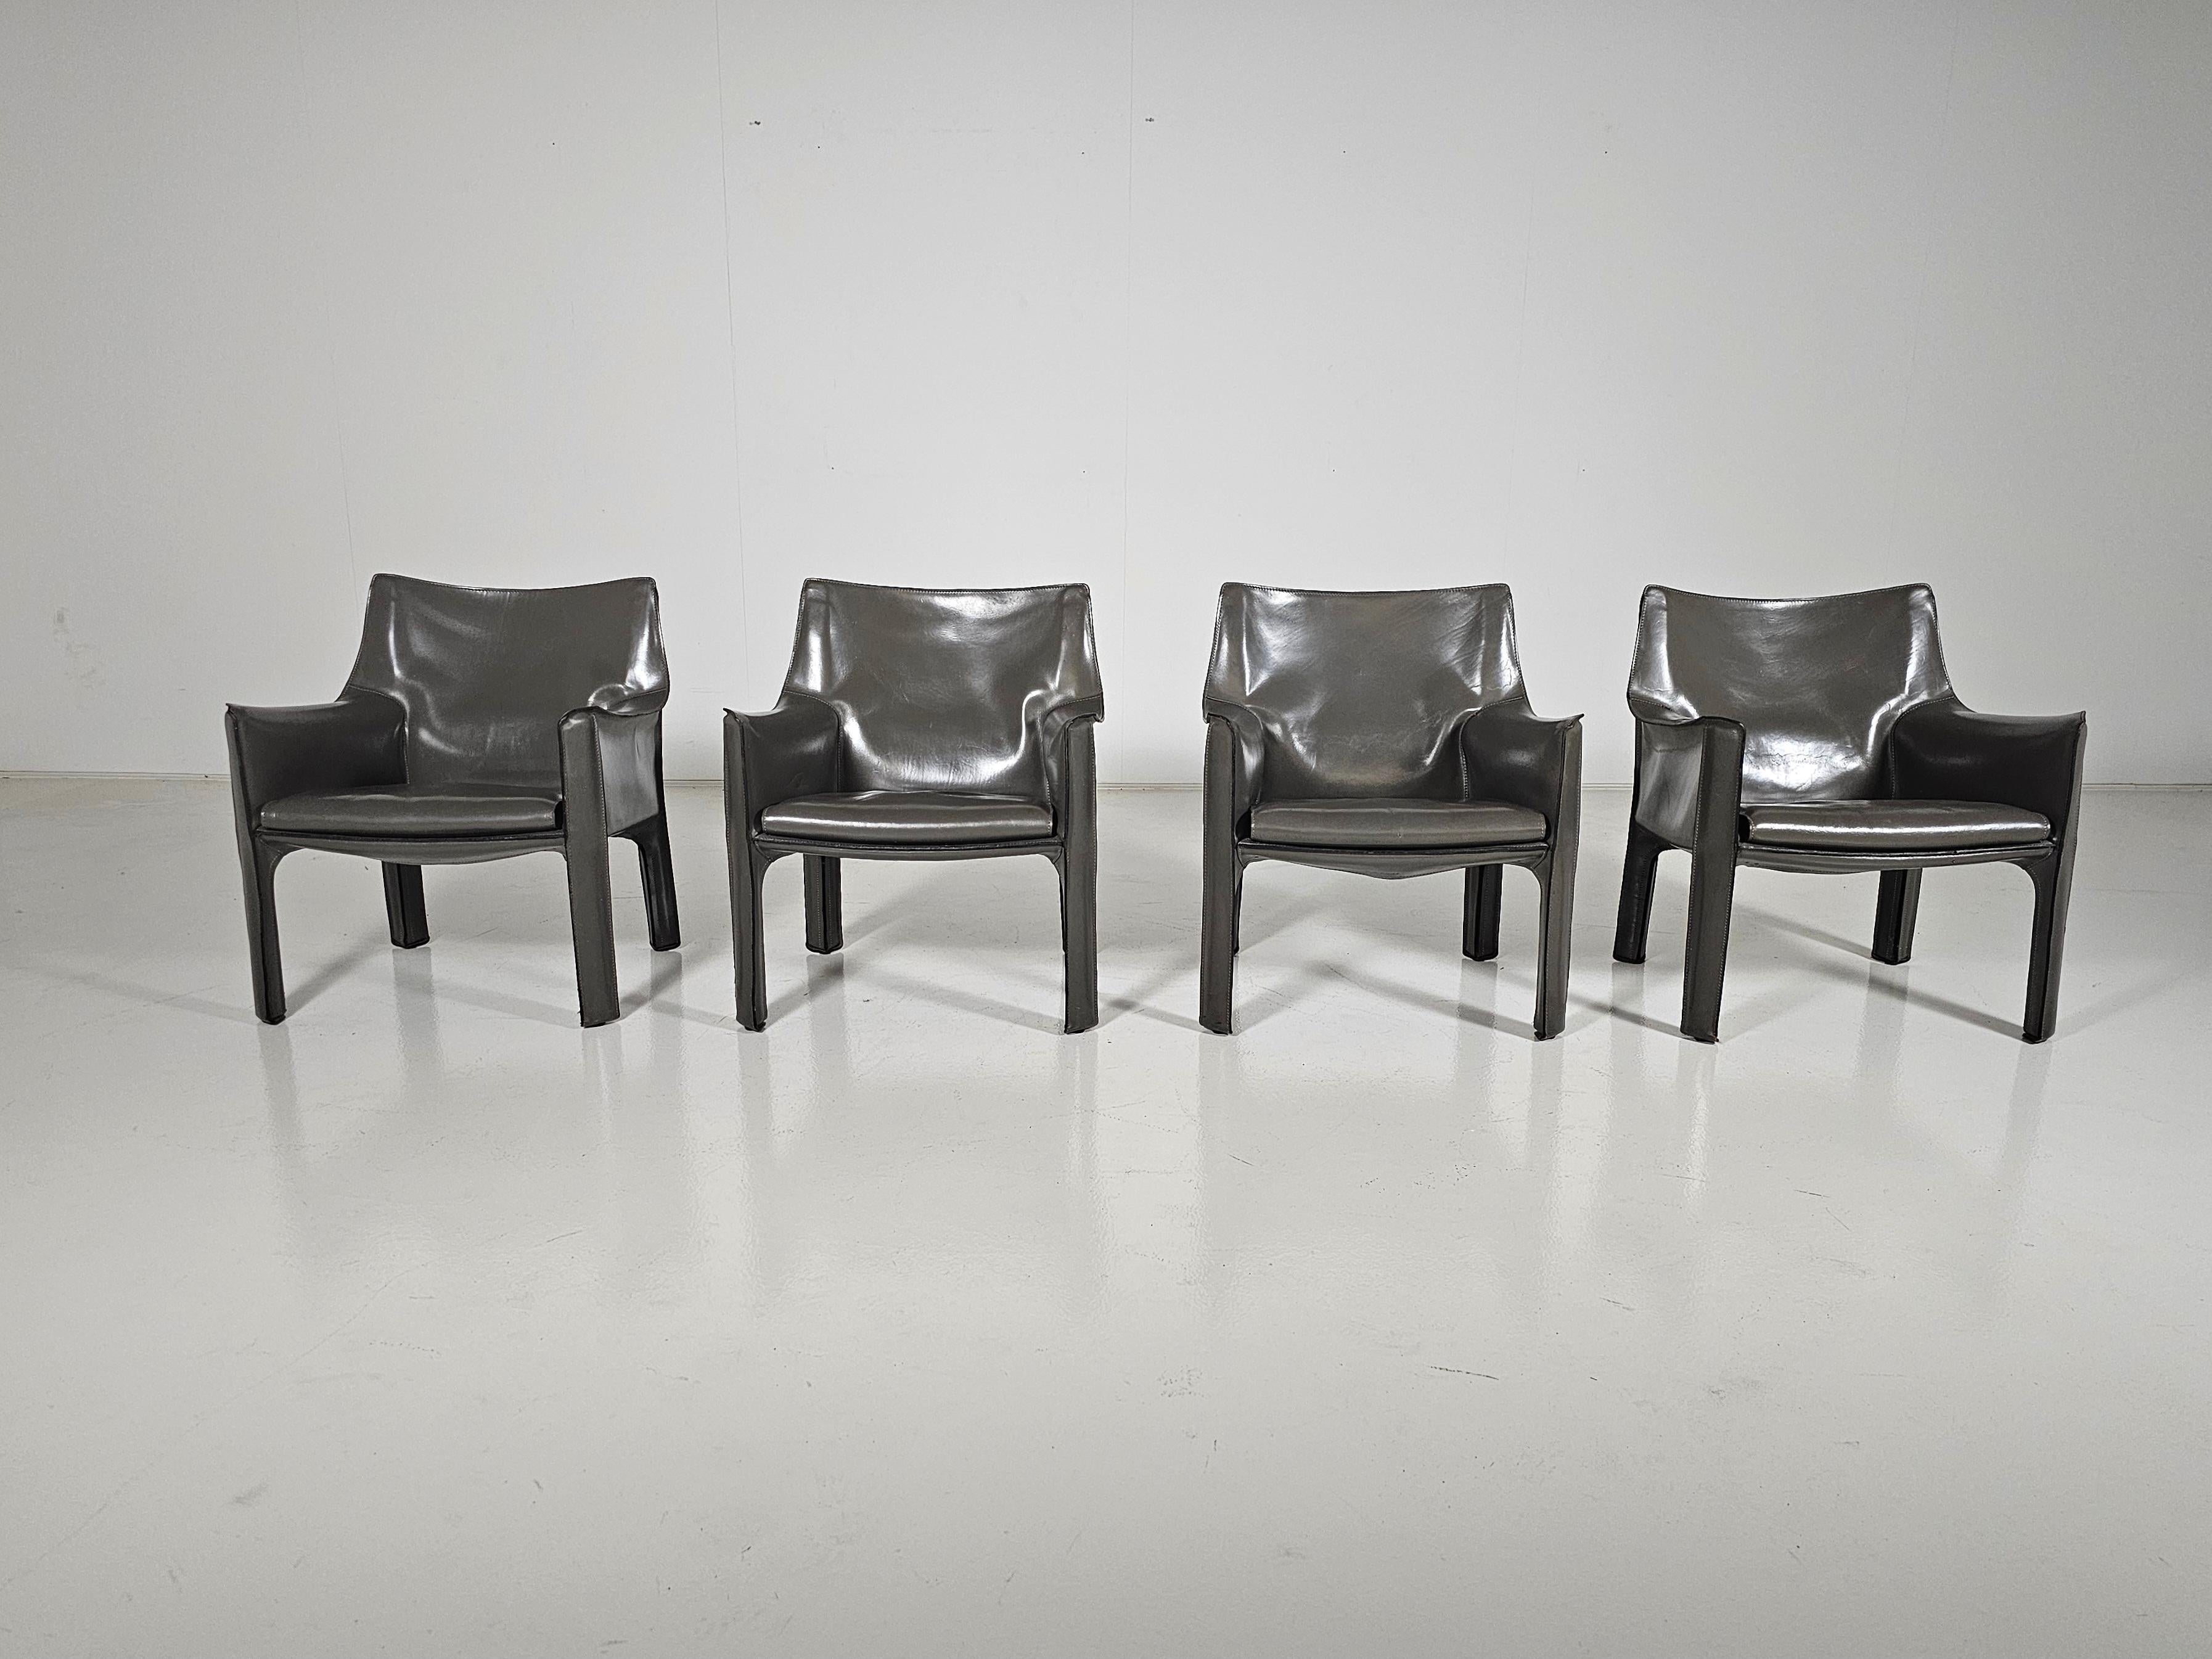 Italian Cassina CAB-414 set of 4 chairs and a 2-seater sofa by Mario Bellini, 1980s